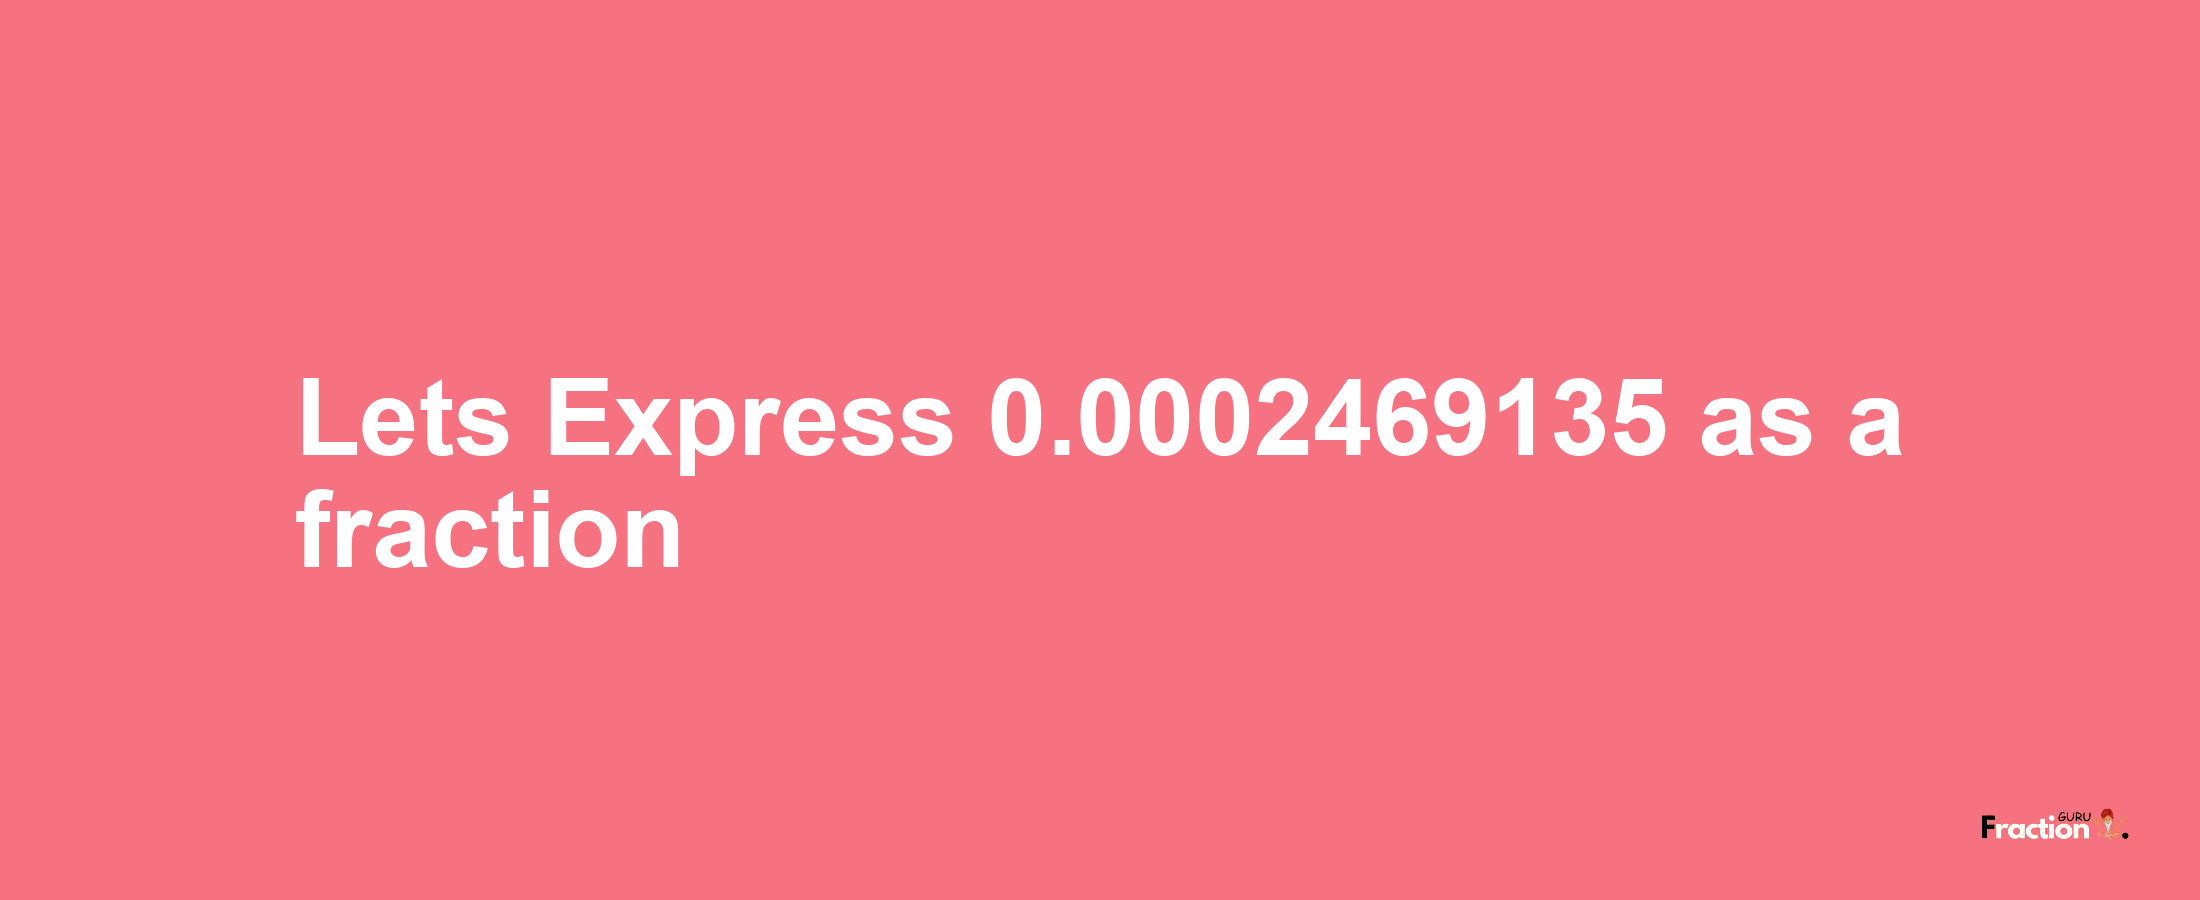 Lets Express 0.0002469135 as afraction